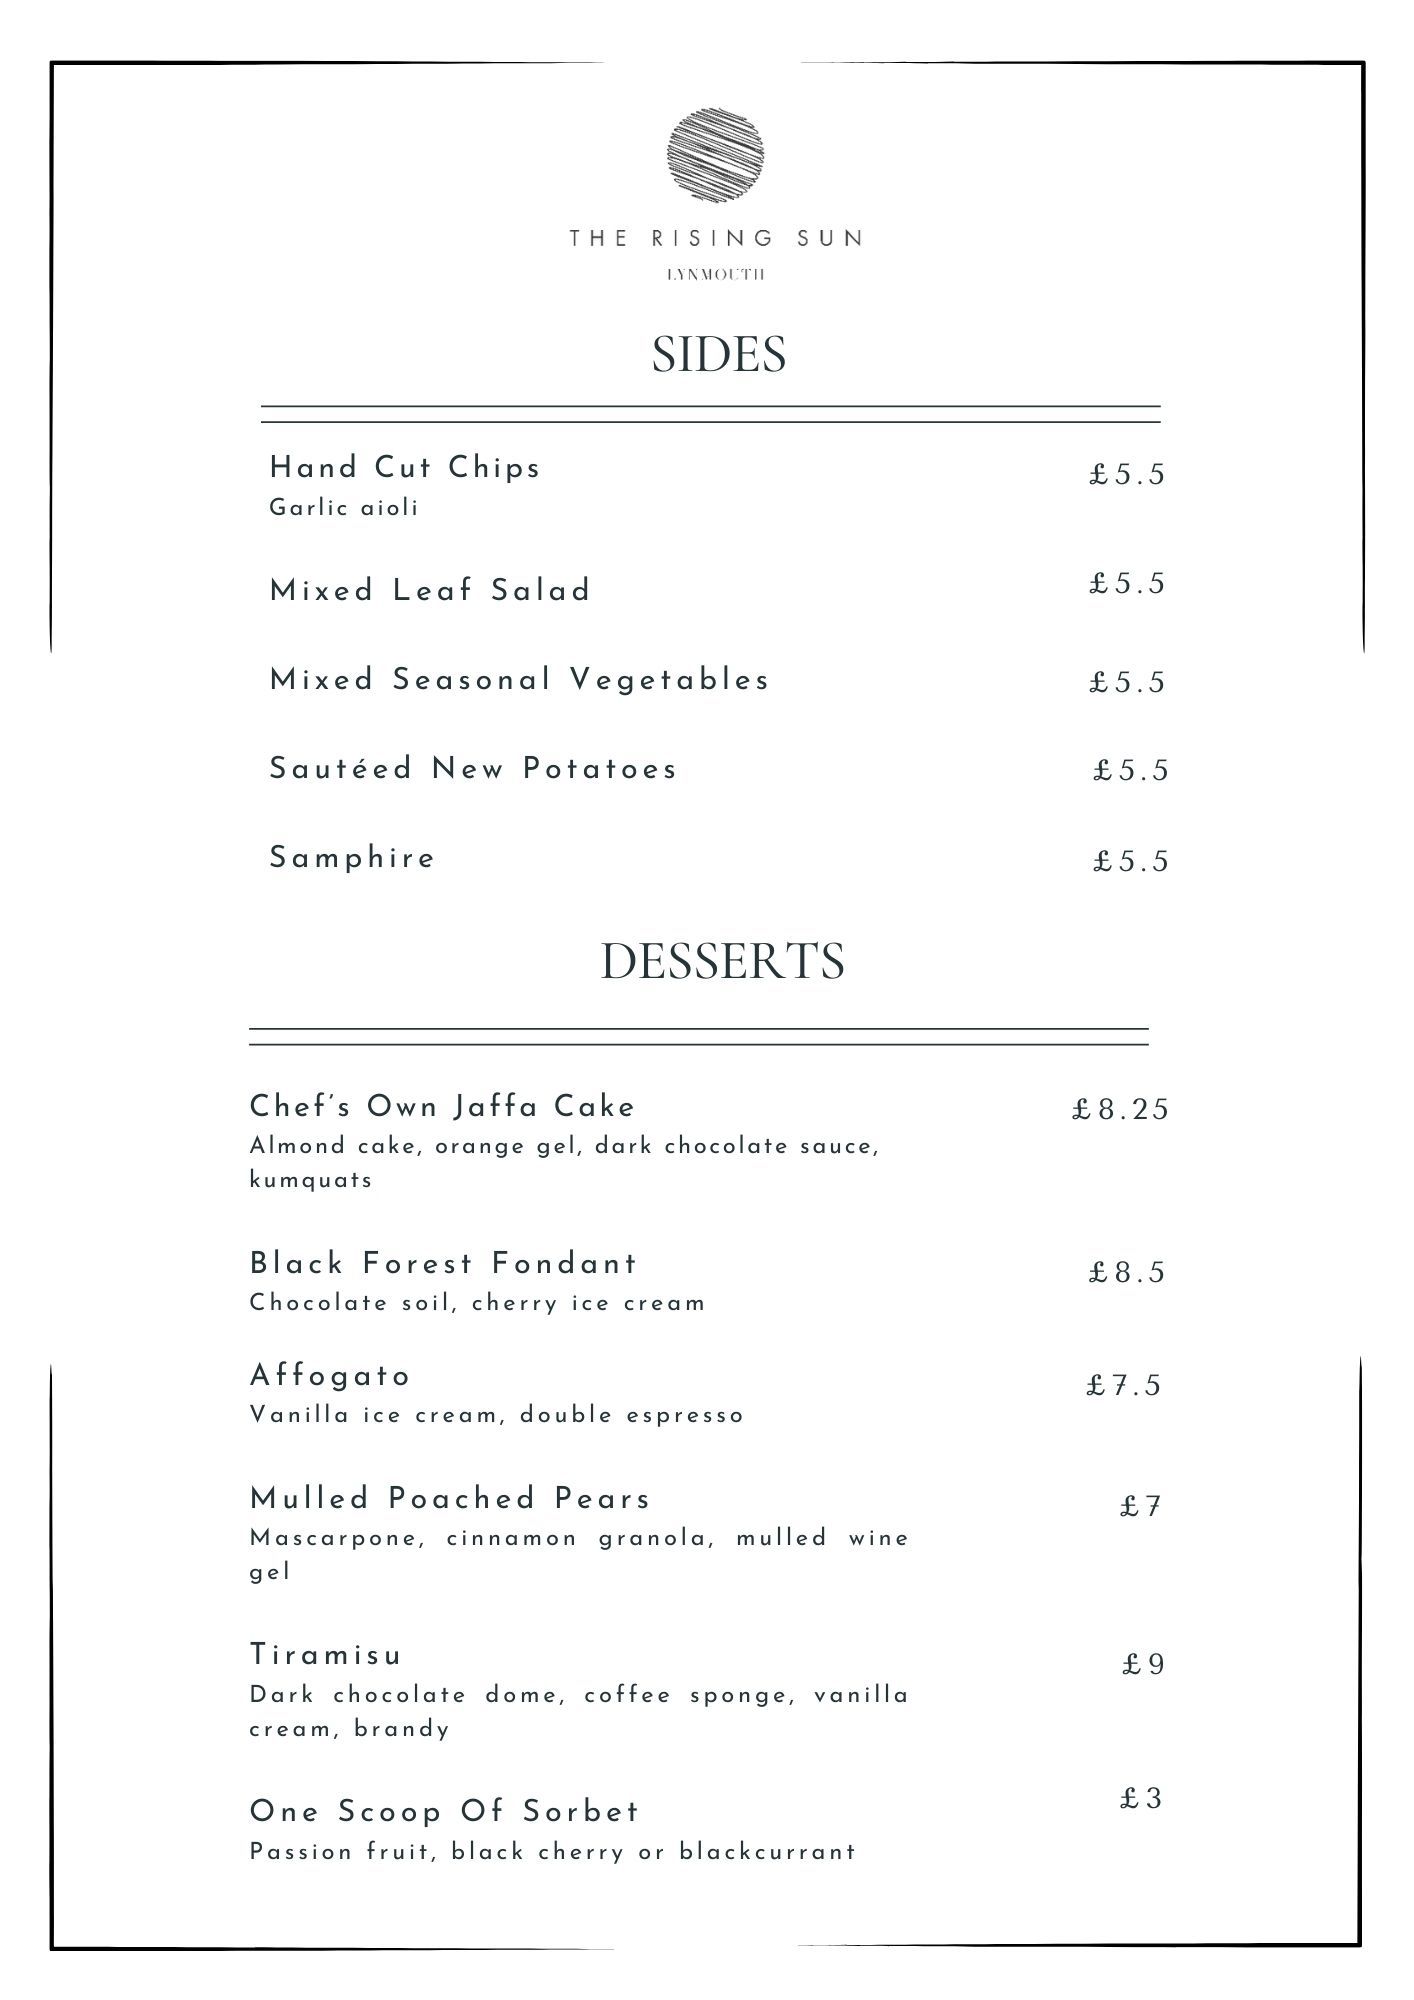 The Rising Sun Sides and Desserts menu.